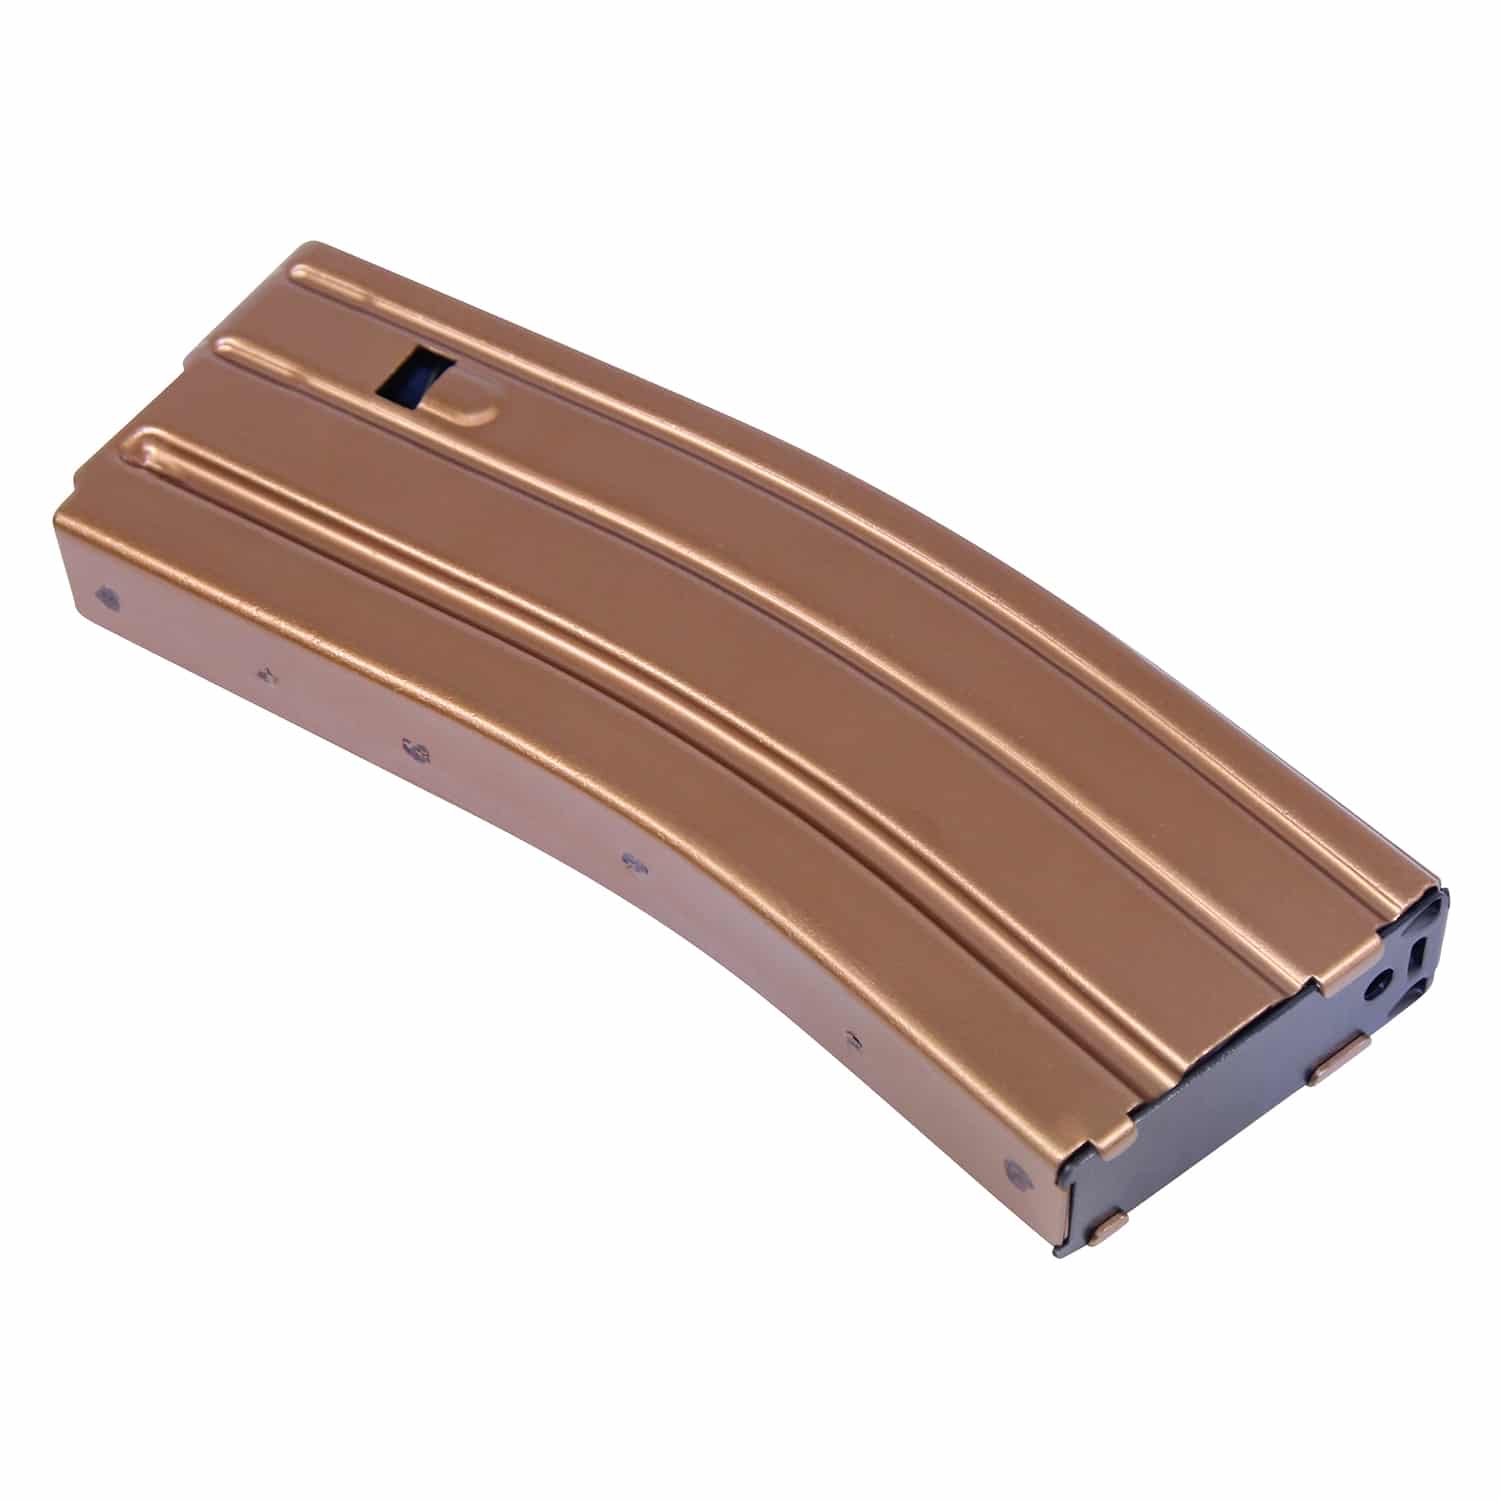 AR 5.56 Aluminum 30 Round Mag With Anti-Tilt Follower in Anodized Bronze